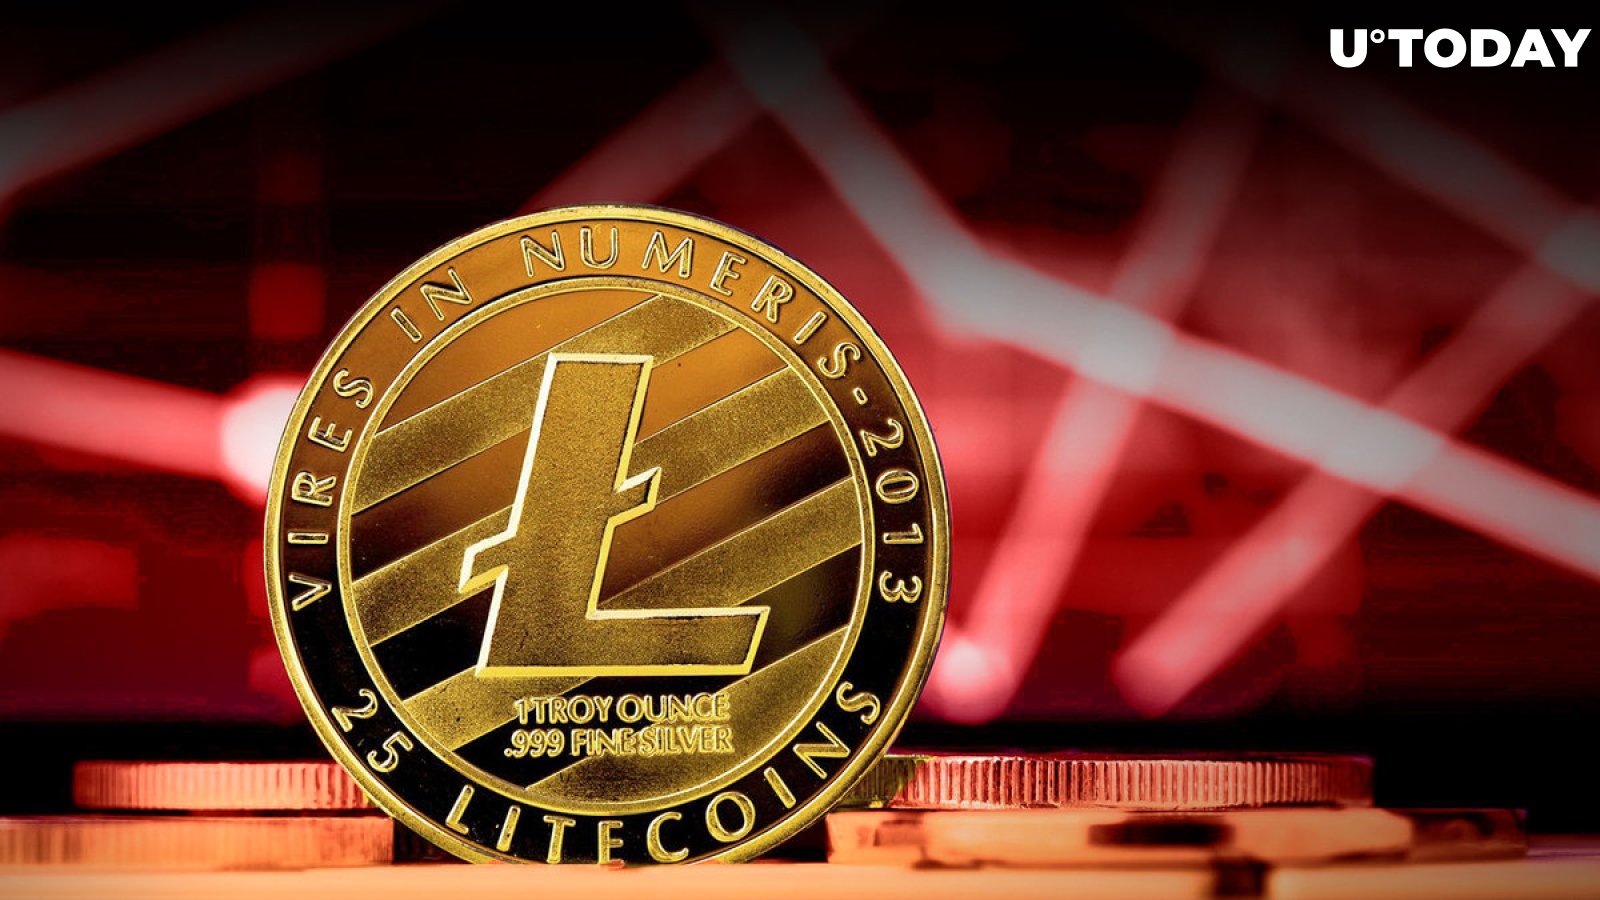 Litecoin (LTC) Halving Just Hours Away, Here's How Many Blocks Left